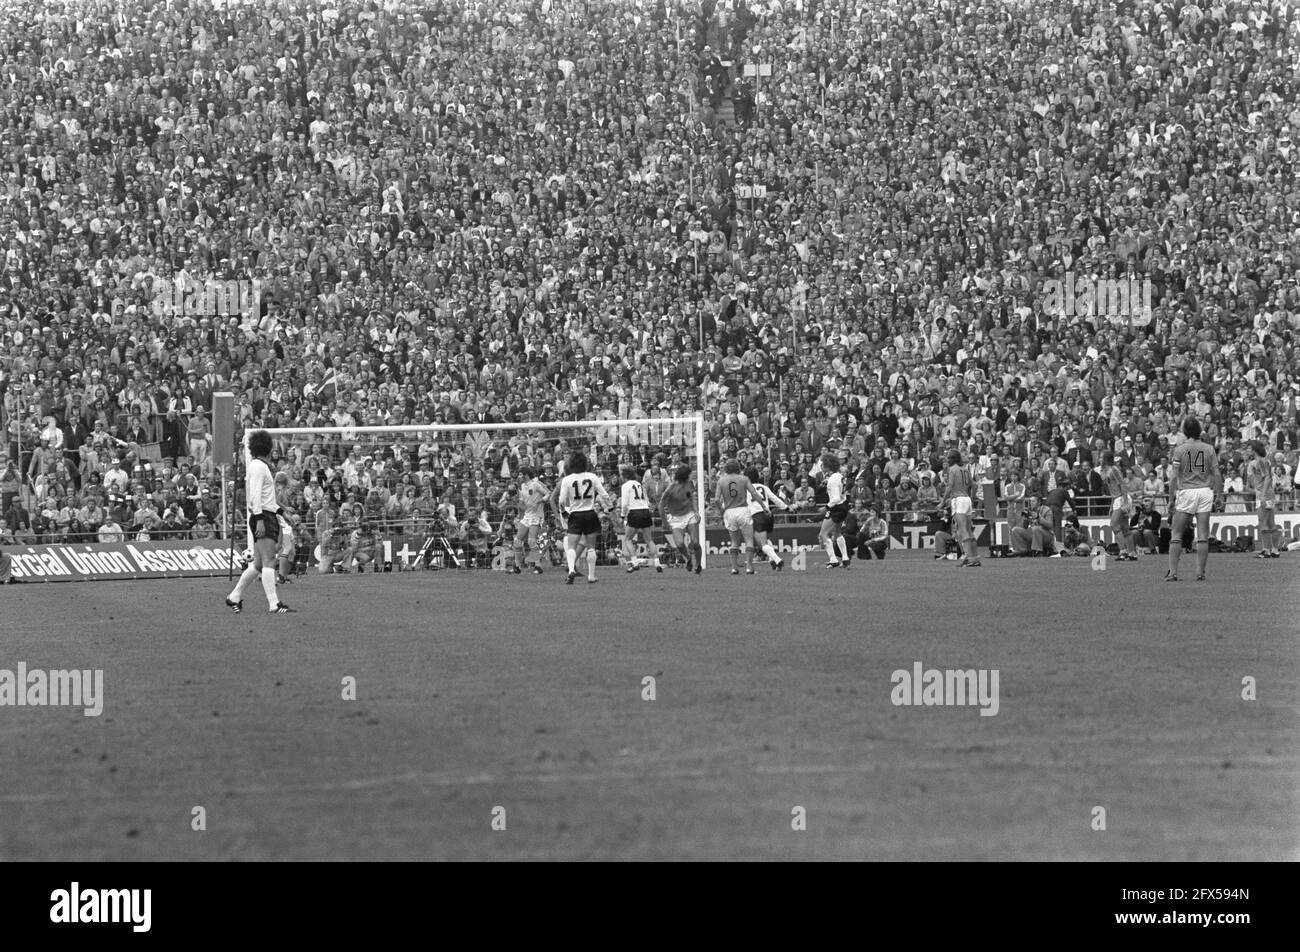 World Cup final 1974 in Munich, West Germany v Netherlands 2-1; game moments, July 7, 1974, finals, sports, soccer, world championships, The Netherlands, 20th century press agency photo, news to remember, documentary, historic photography 1945-1990, visual stories, human history of the Twentieth Century, capturing moments in time Stock Photo